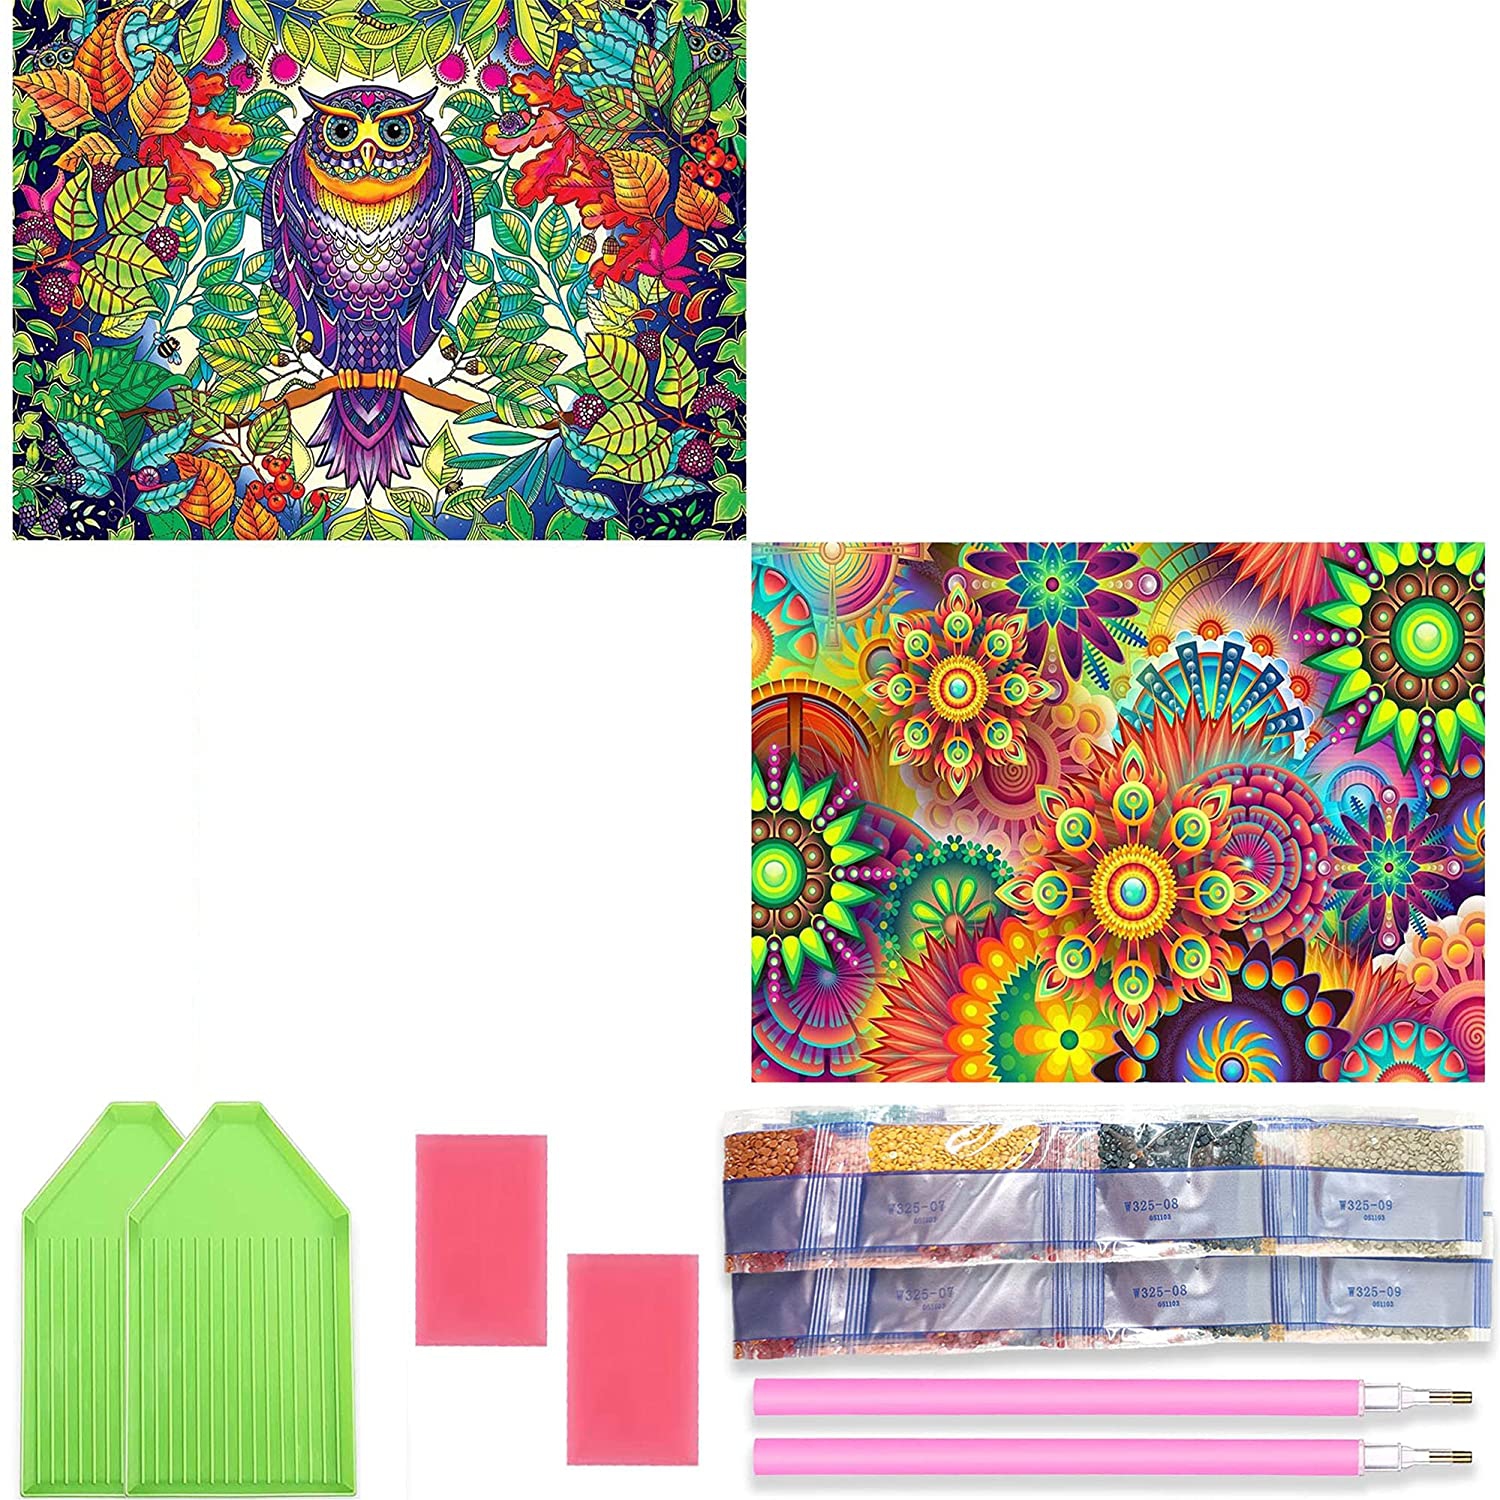 Ginfonr 5D DIY Diamond Painting by Number Kits Colorful Owl & Mandala Flower for Adults Full Drill, Kaleidoscope Paint with D